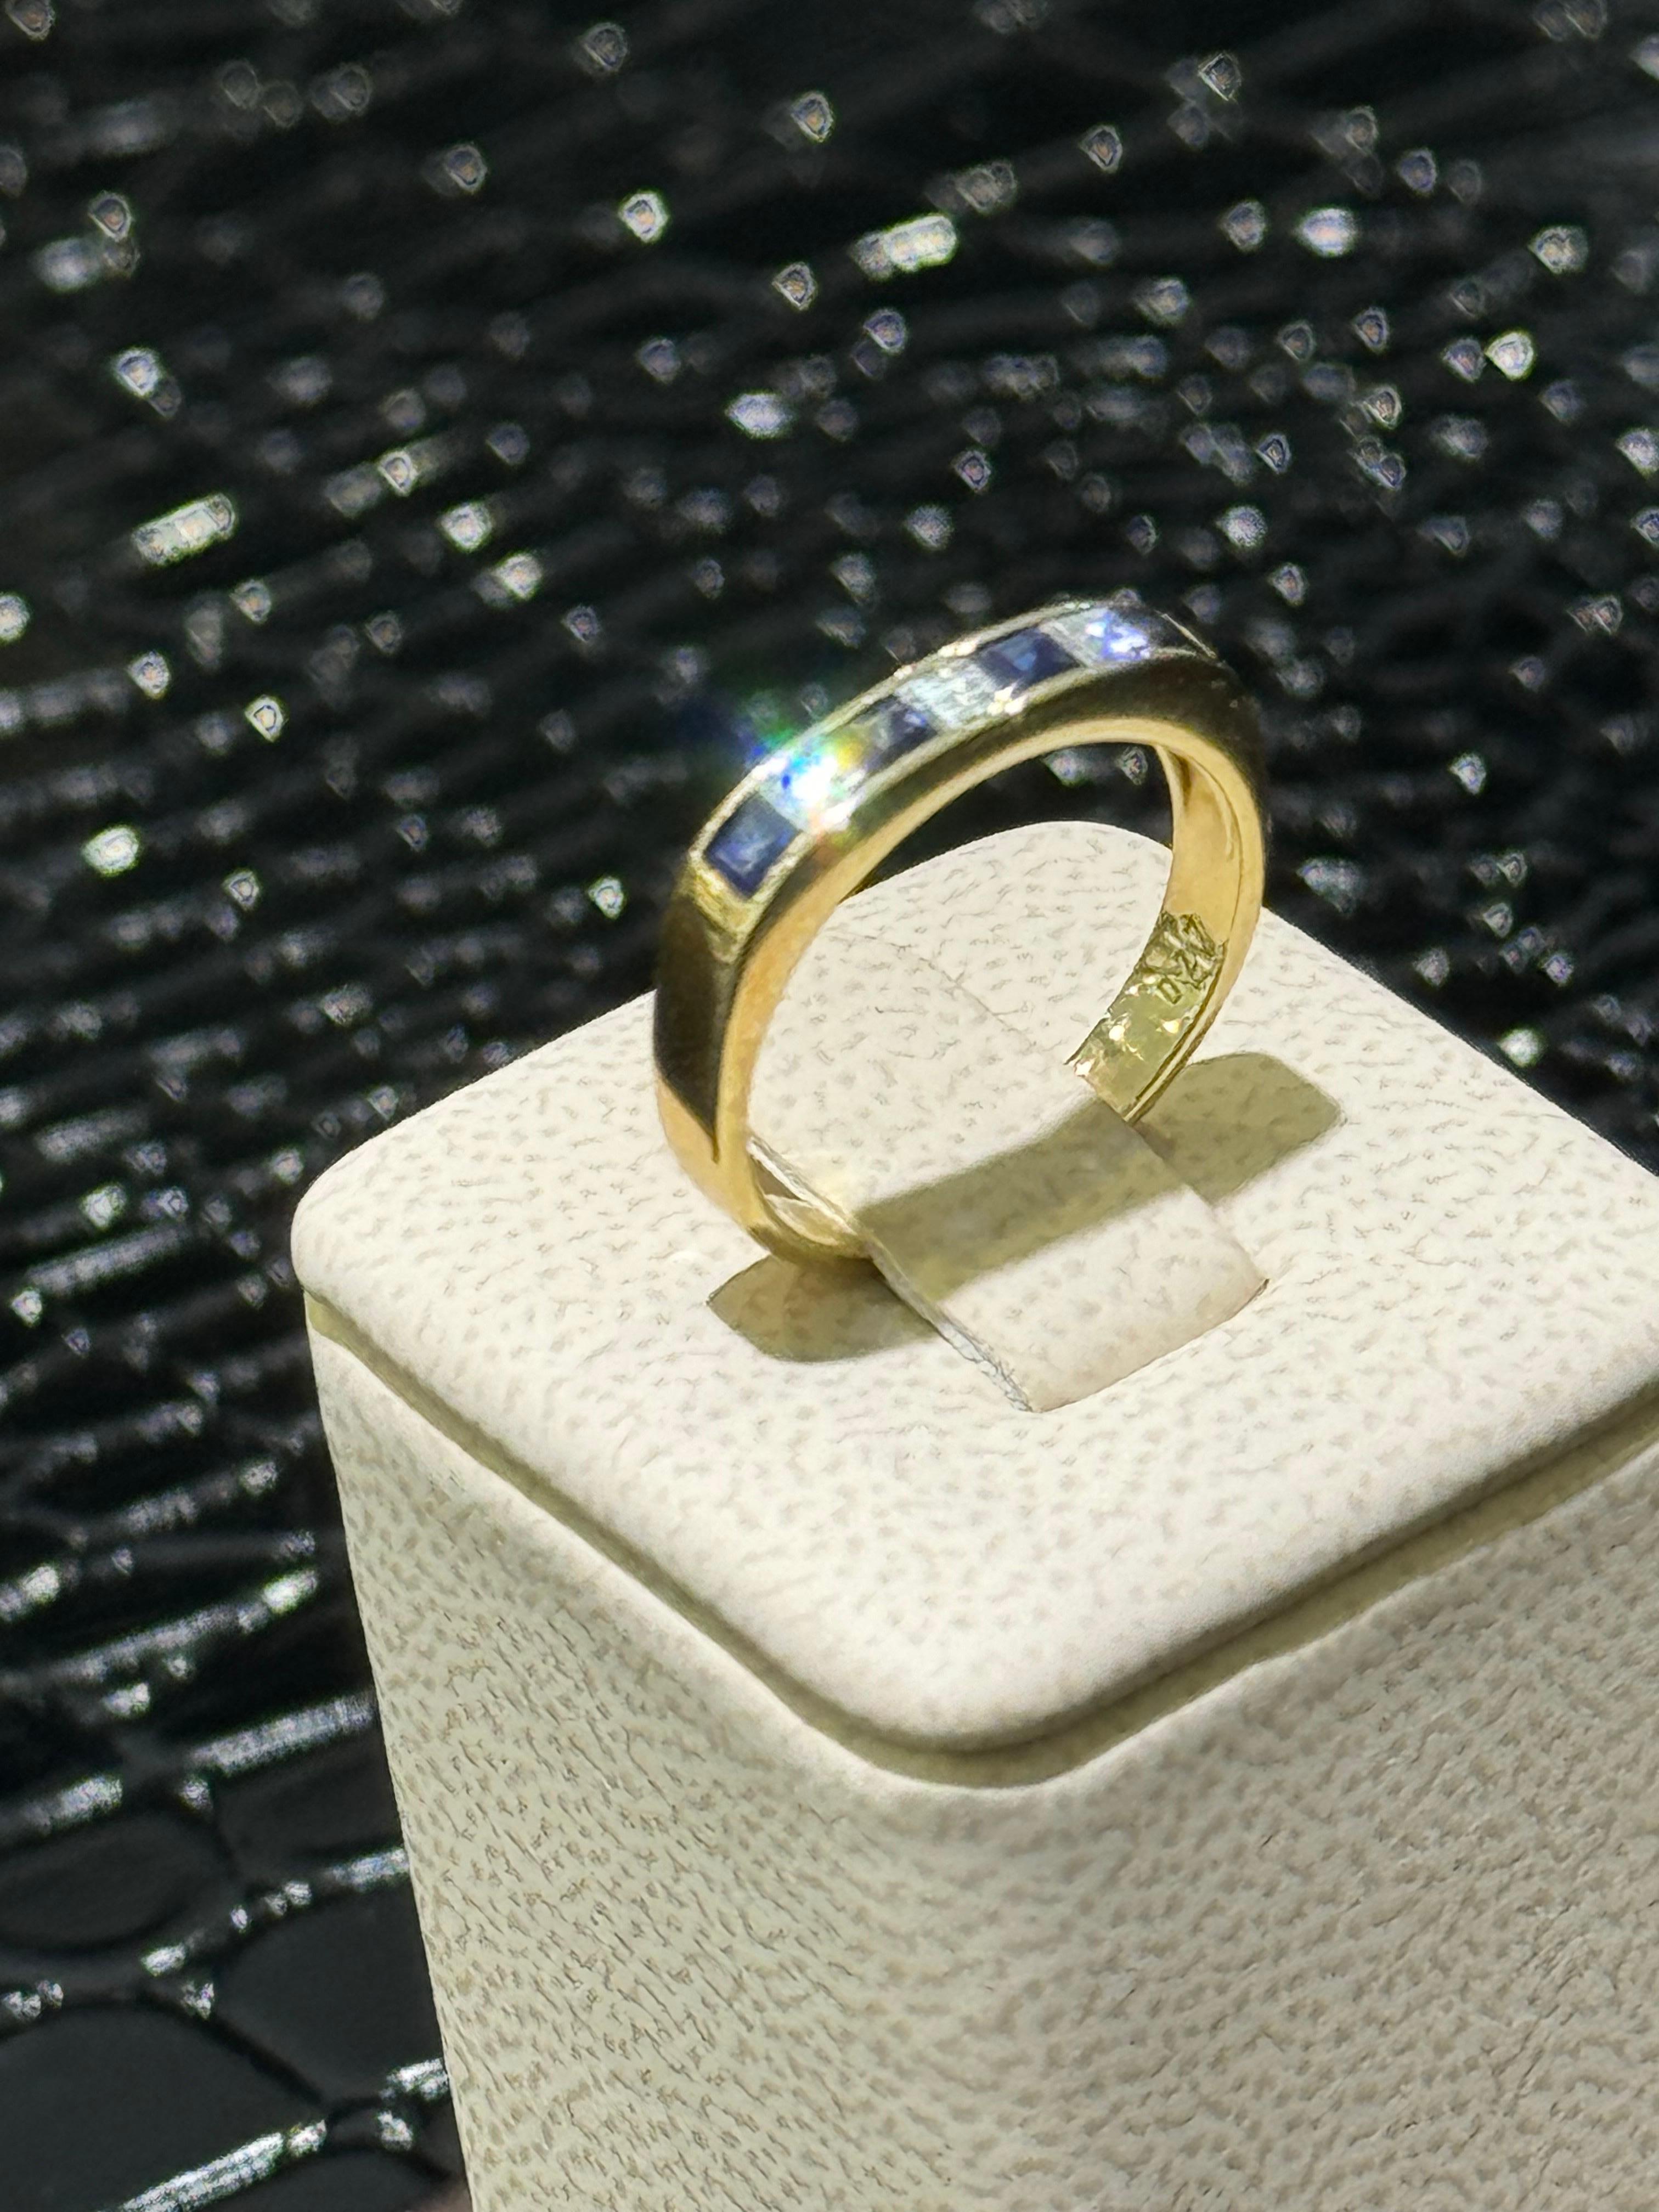 Diamond & Sapphire Ring In 14k .

0.27 carats in princess cut diamonds,

0.40 carats in blue sapphires.

Size 6.25

Shank width on the side where the stones are - 3mm